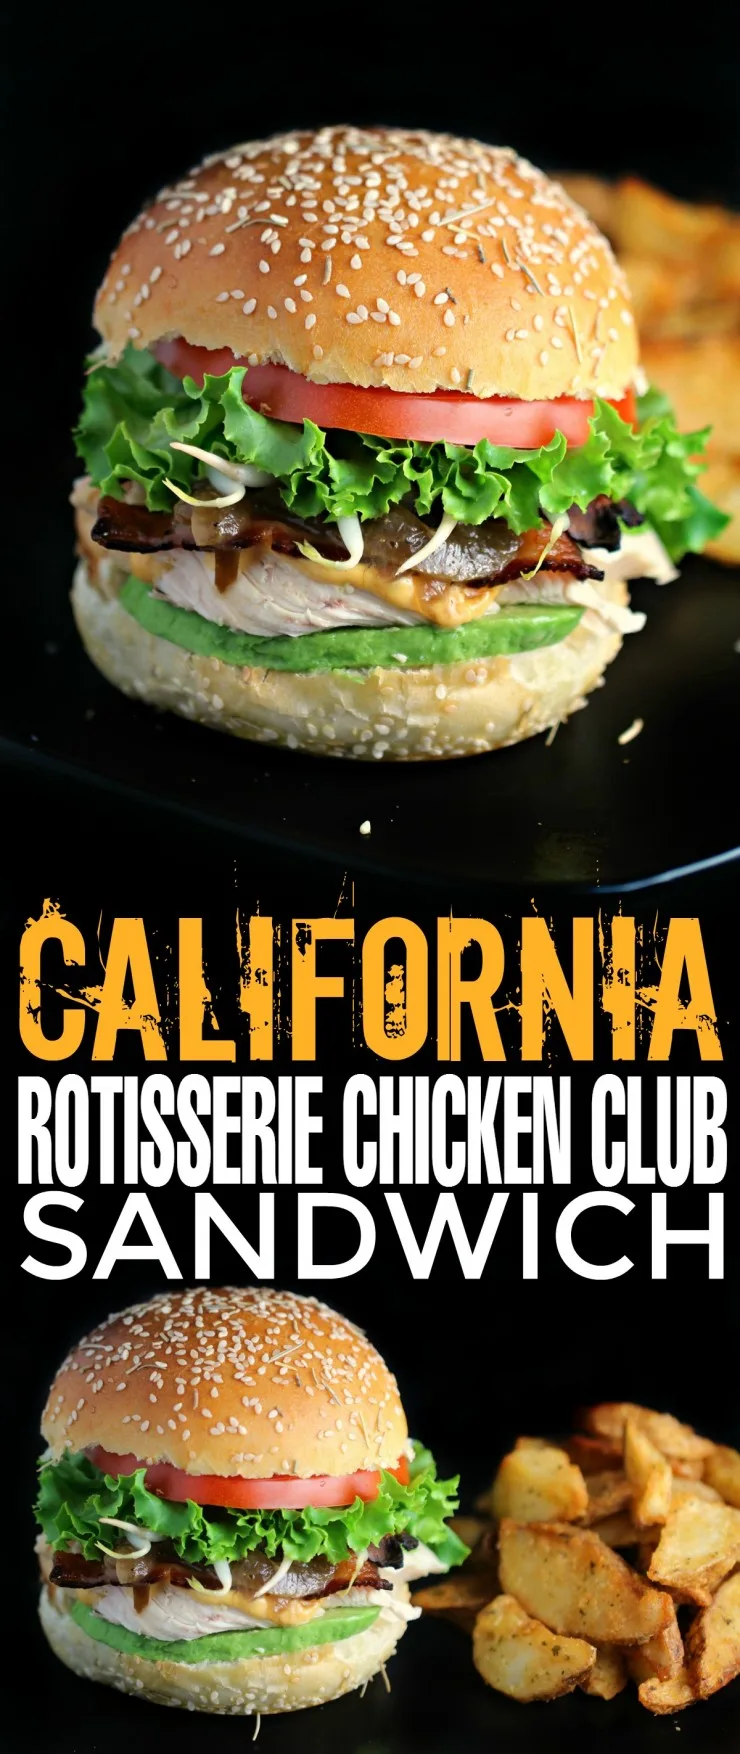 This California Rotisserie Chicken Club Sandwich makes use of leftover chicken paired with applewood smoked bacon, avocado, caramelised onions and more! Great Lunch idea!